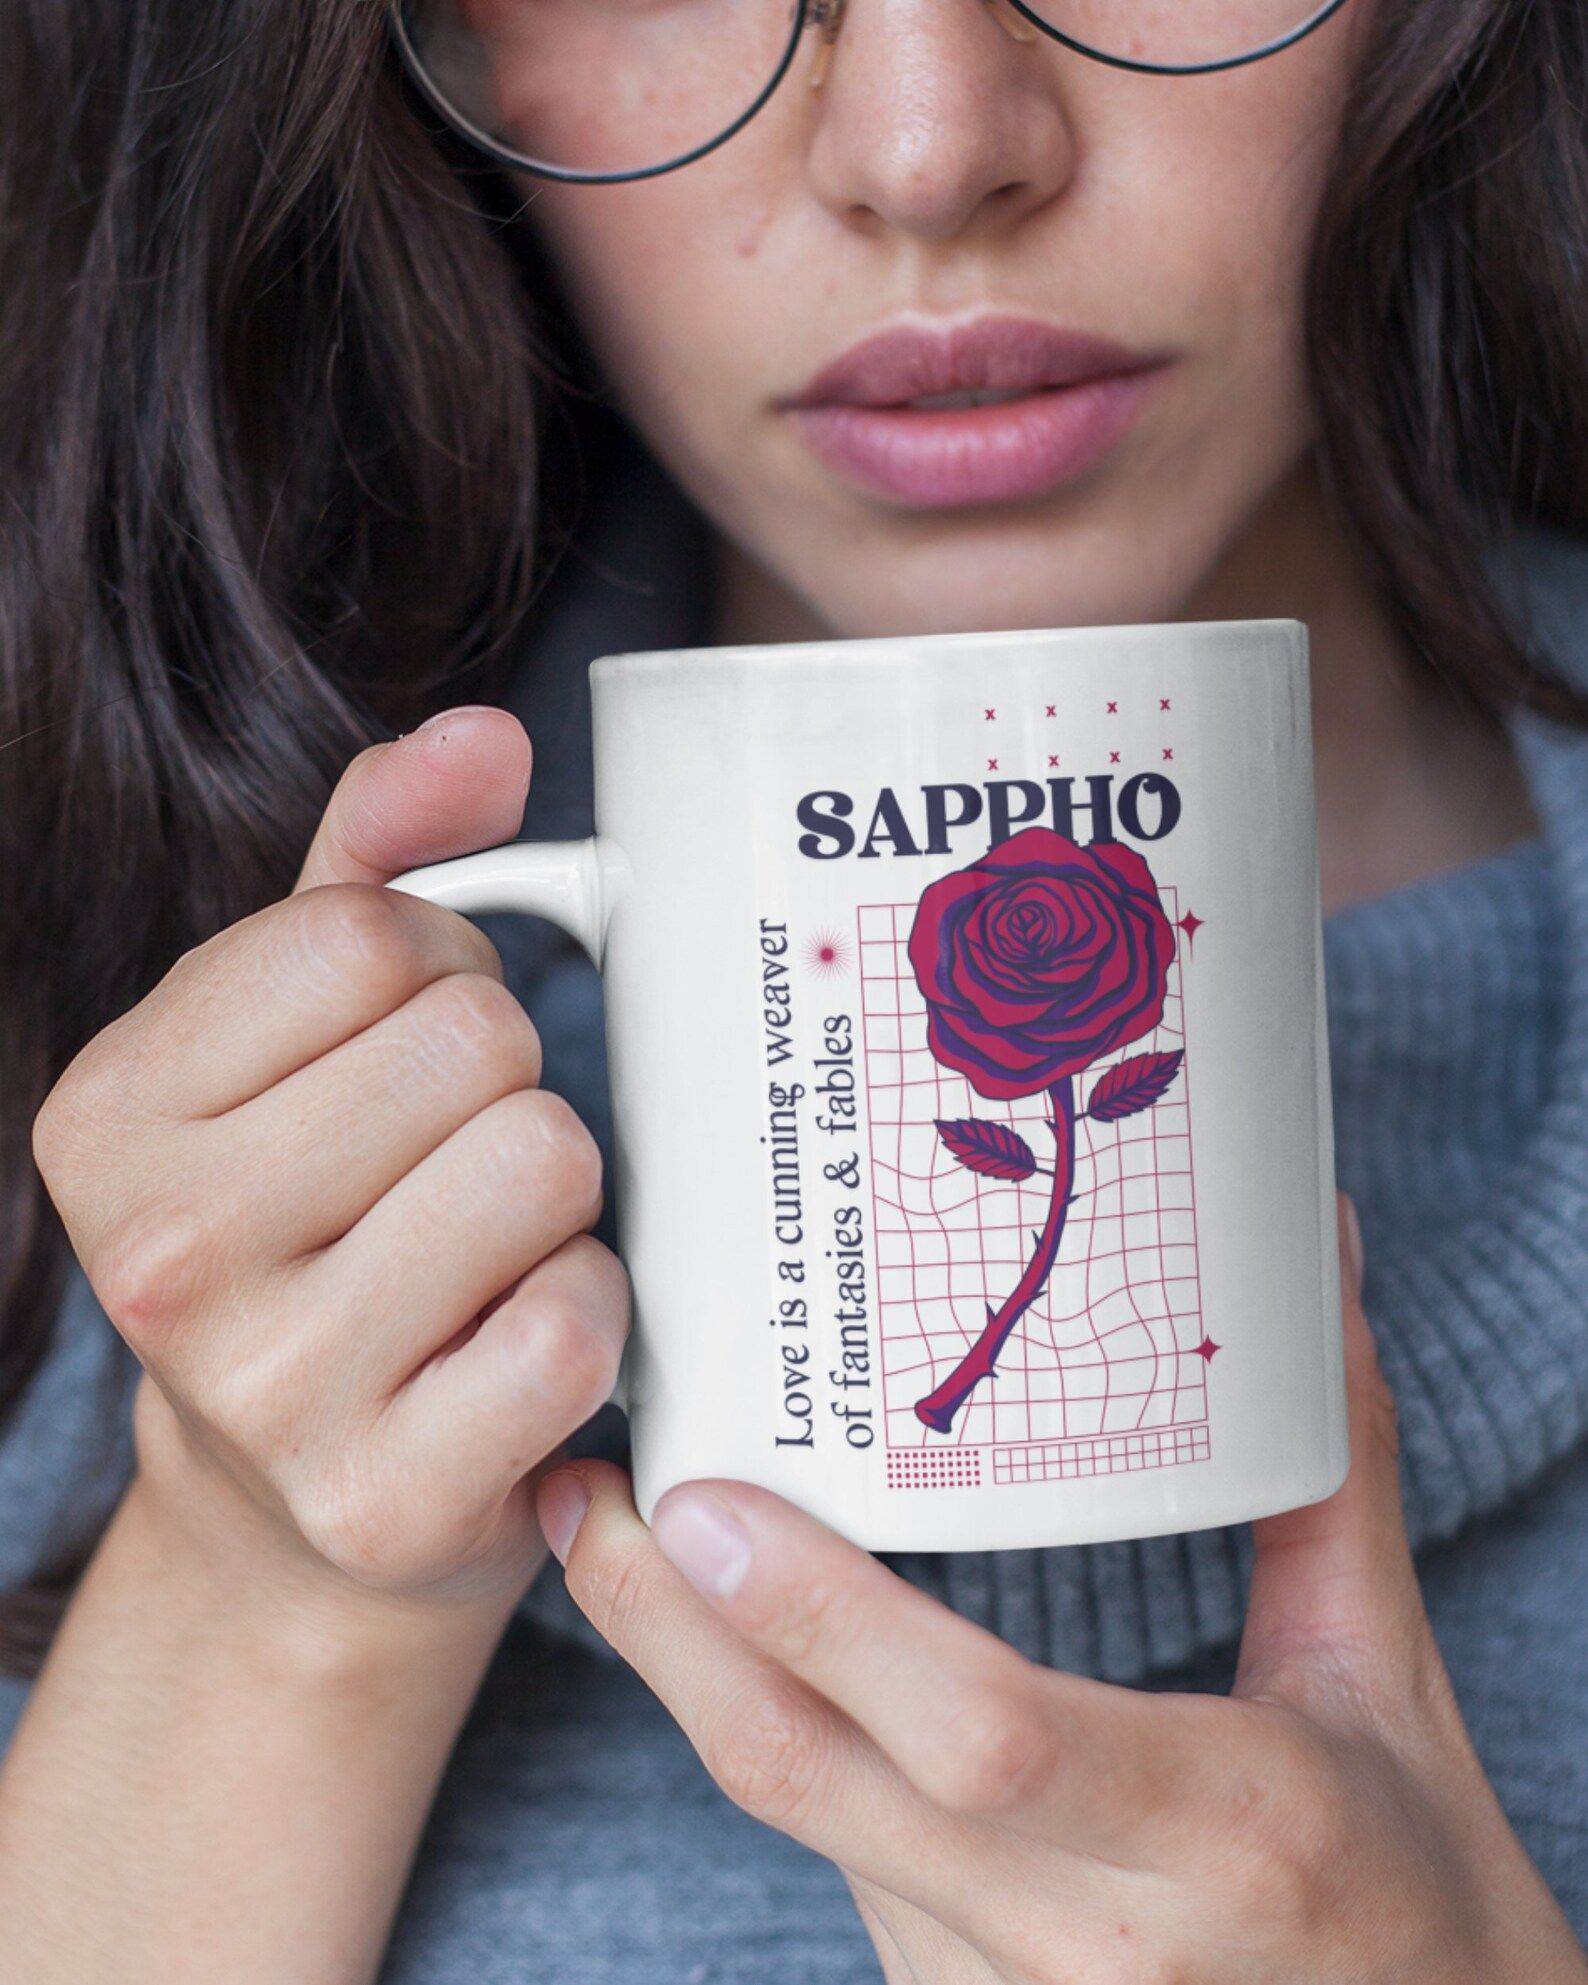 Image of a mug with a rose honoring Sappho. It is being held by a person with olive skin. 